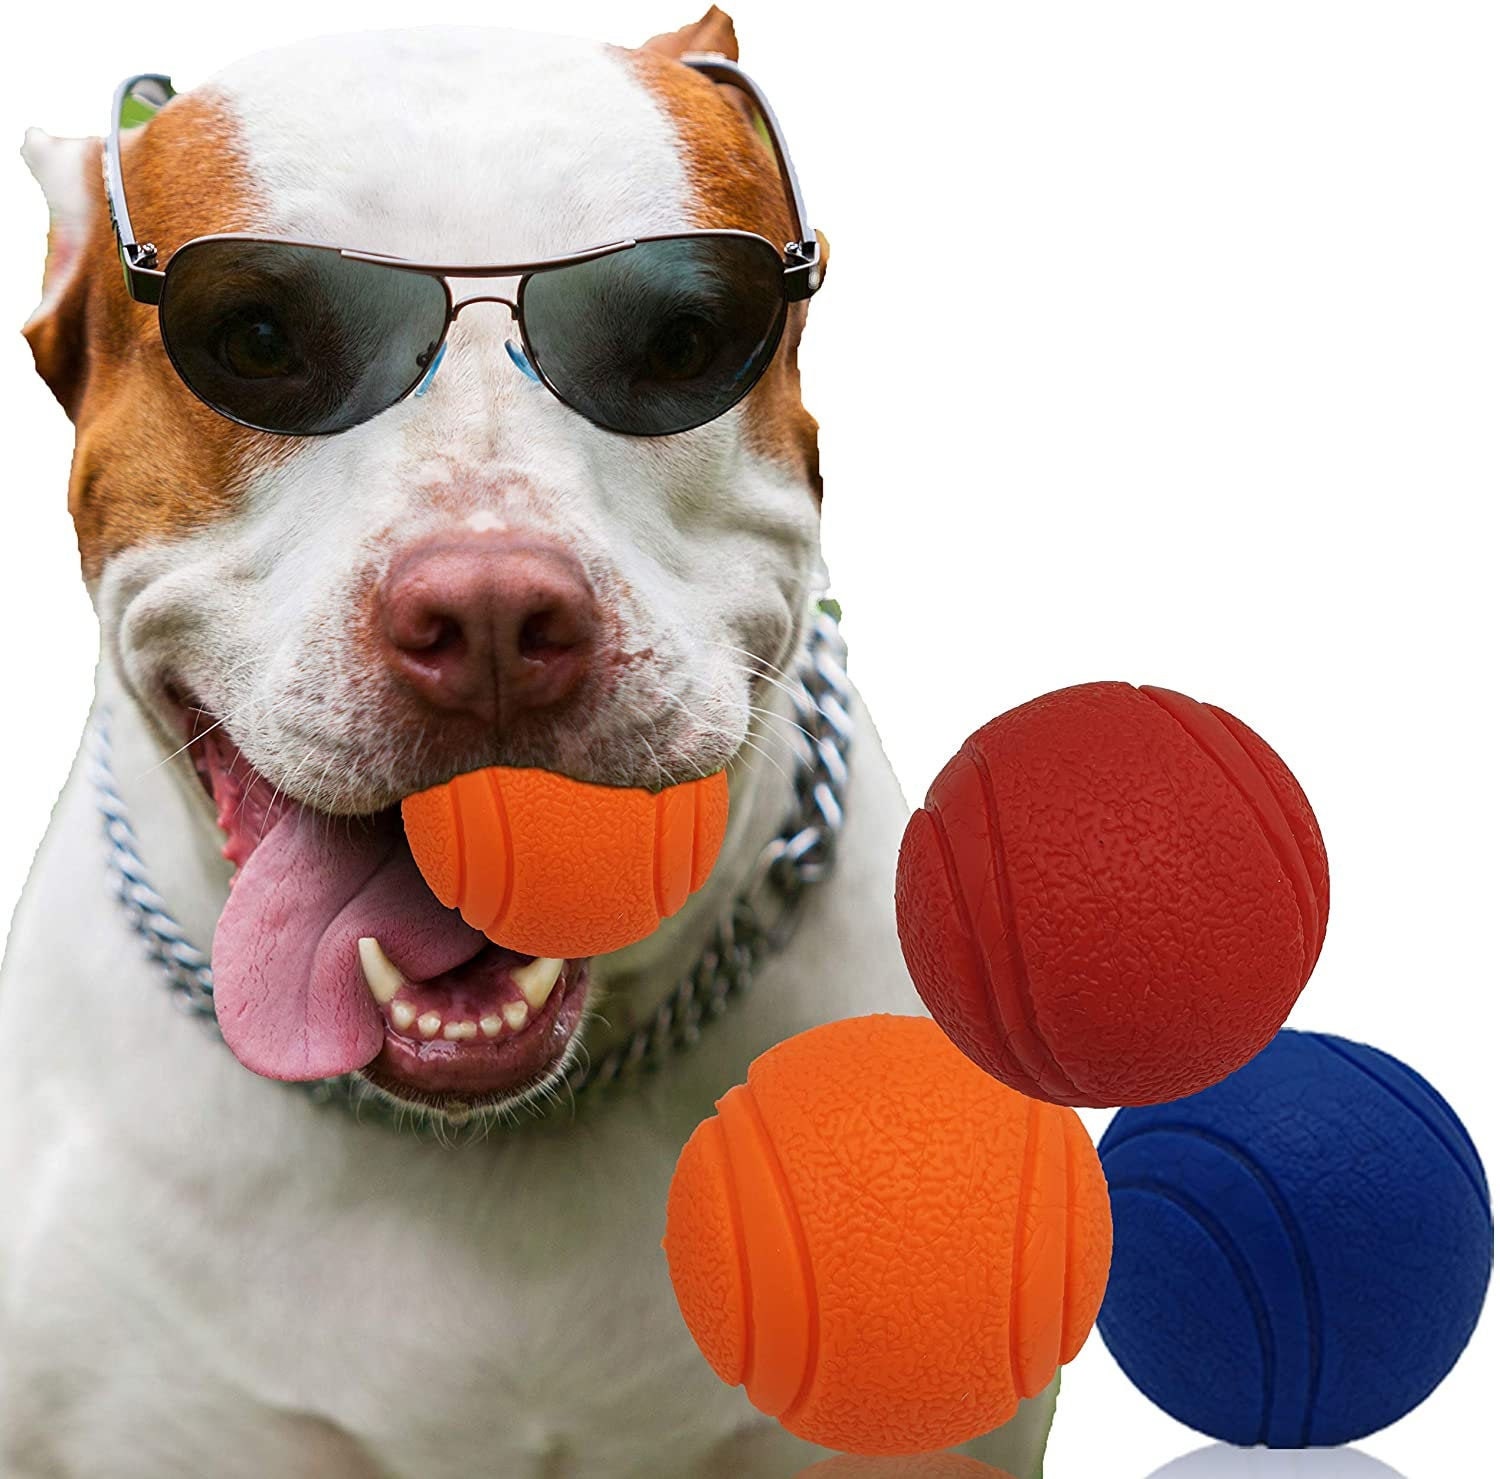 Interactive Dog Toys Ball,Dog Teat Puzzle,Indestructible Dog Toys for  Aggressive Chewers,Fun Dog Squeaky Toys,Dog Treat Dispenser,Chew Toys,Dog